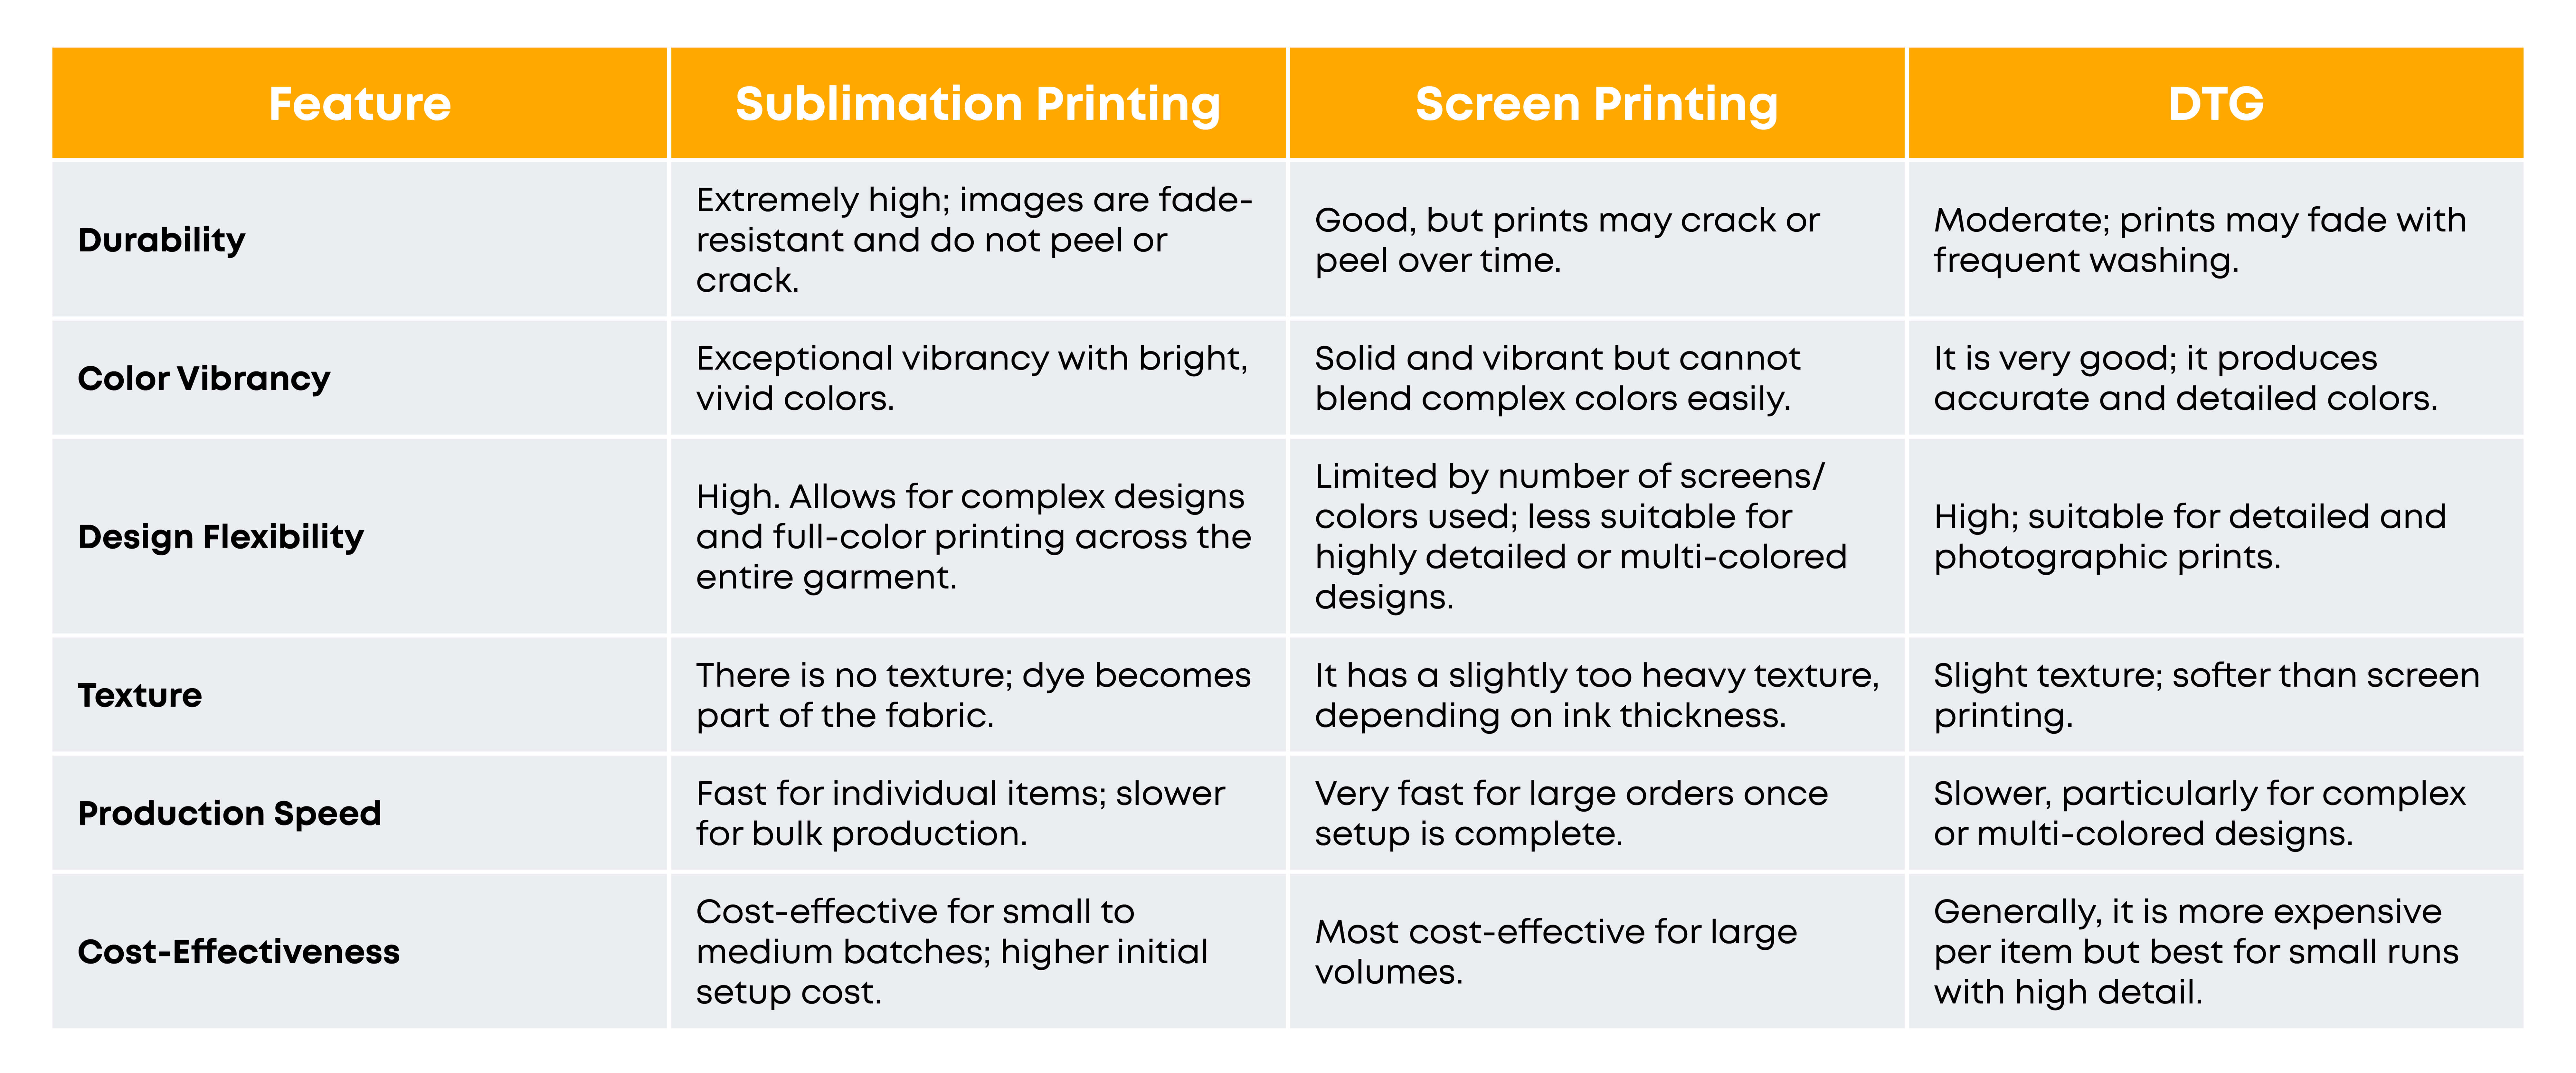 Comparison with Other Printing Techniques